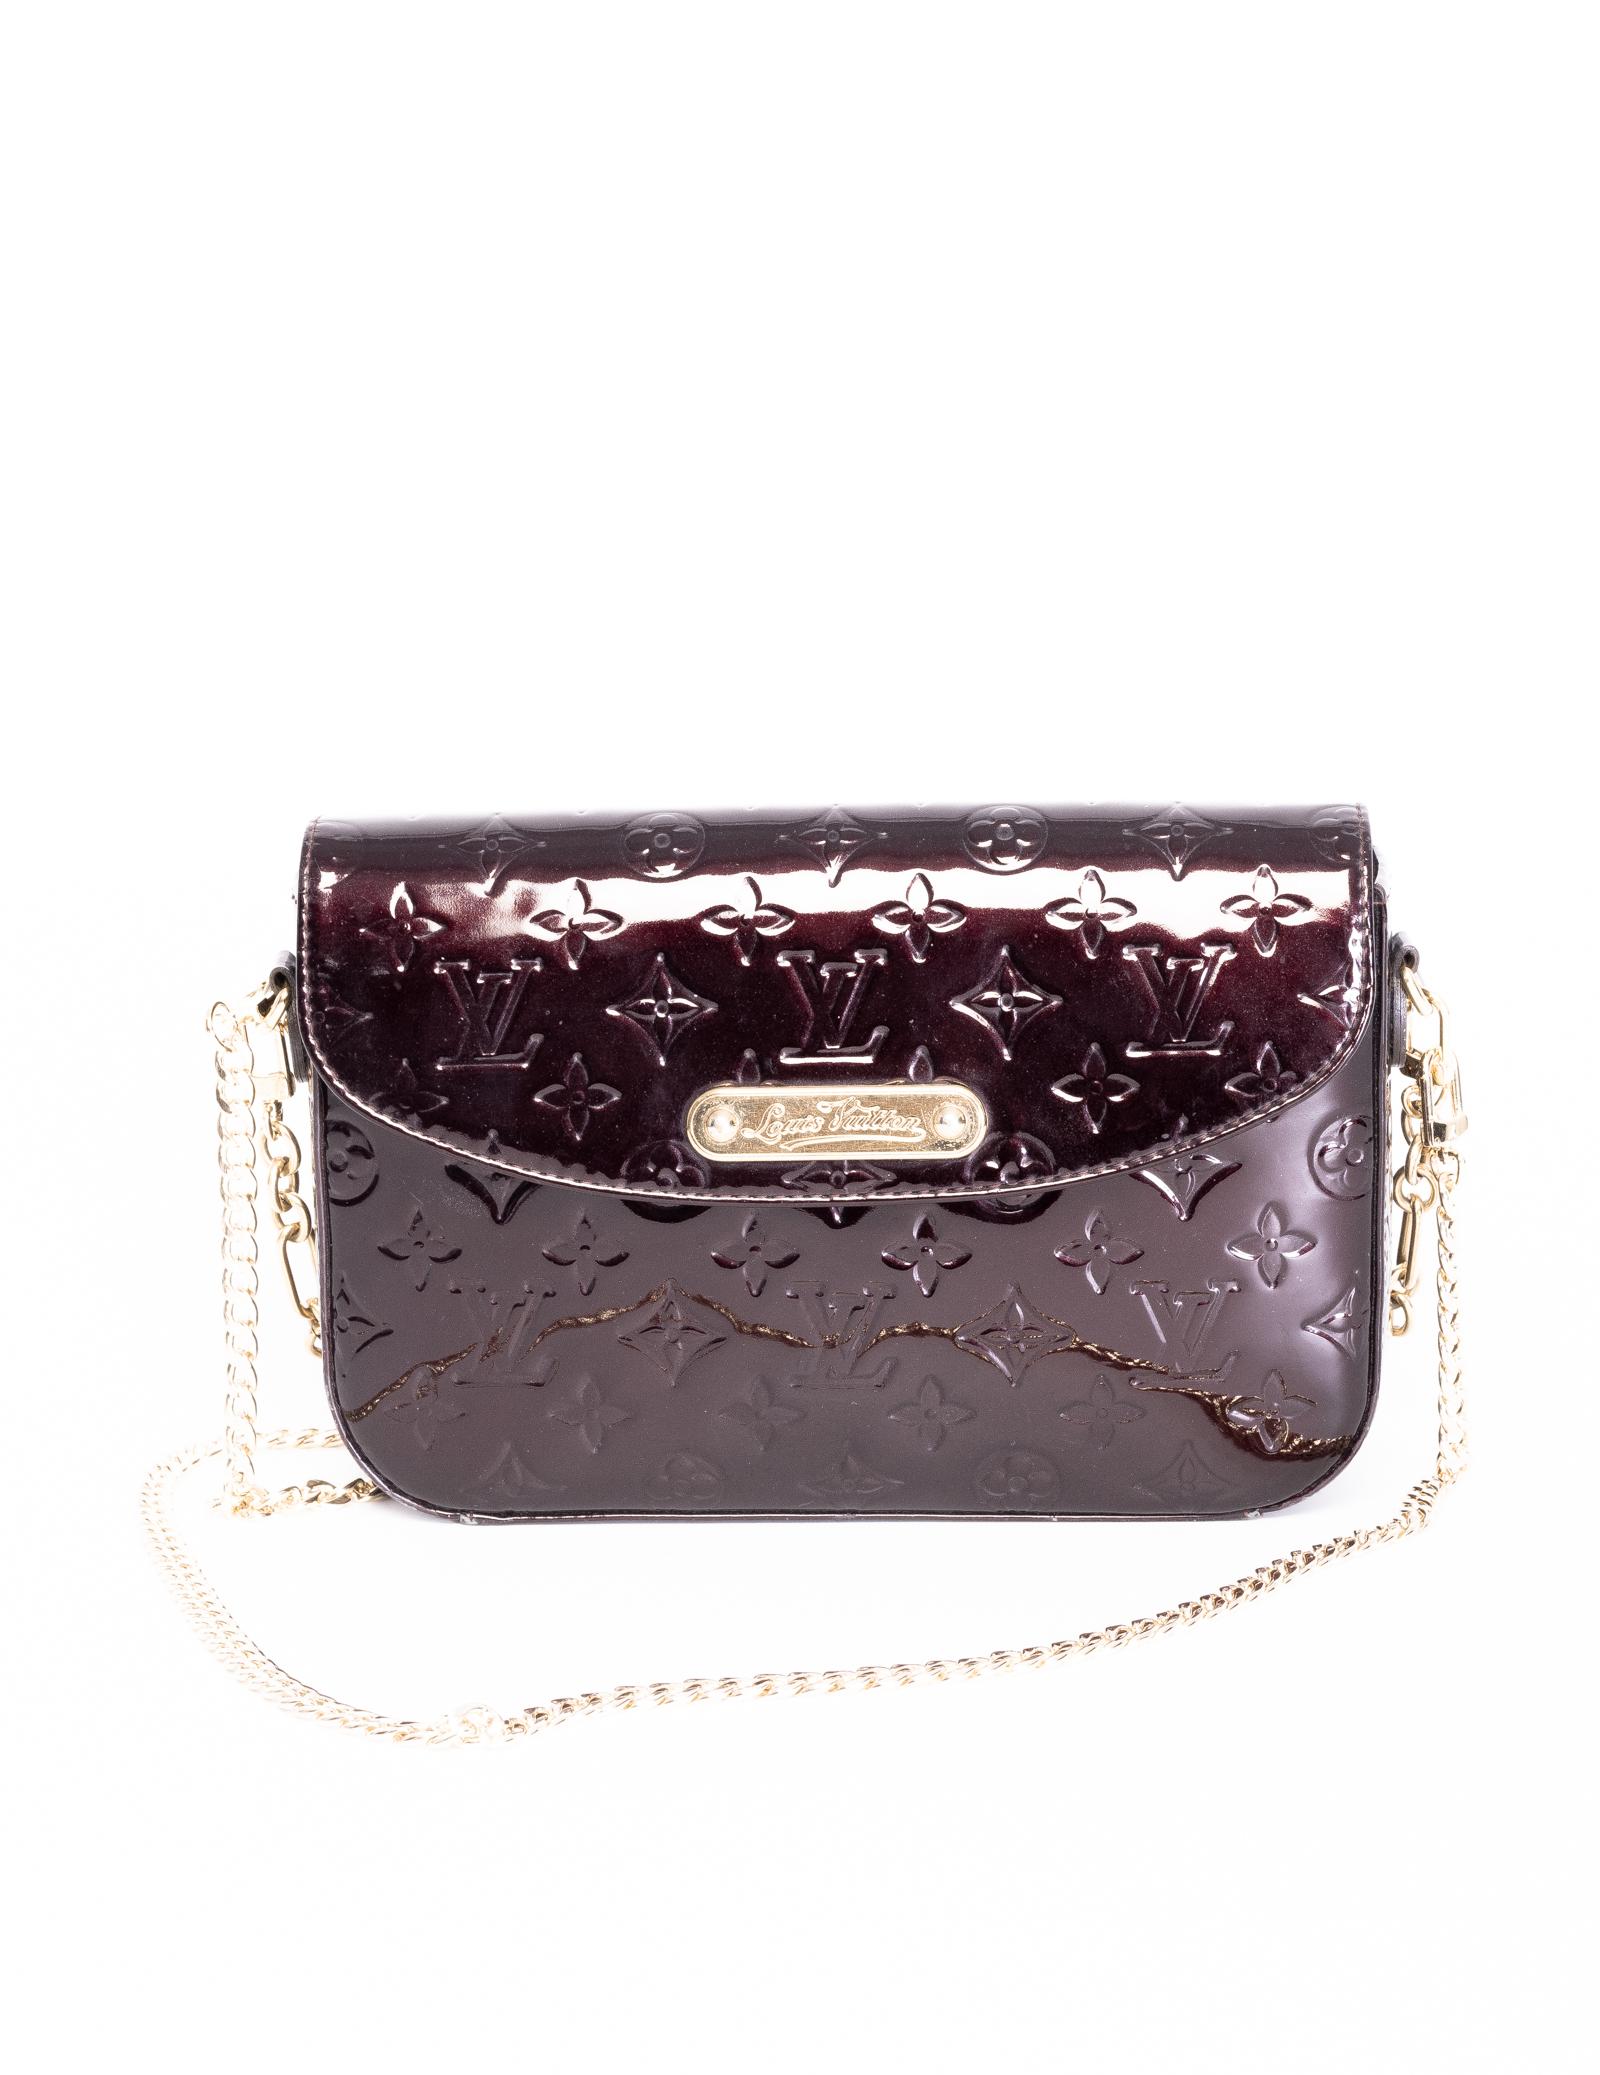 This style of patent leather monogram embossed bags are named Vernis as the French word for varnish is “vernis”.  Vernis was introduced by Marc Jacobs in 1998. 
This bag is made of calfskin leather embossed with monogram print and coated with a